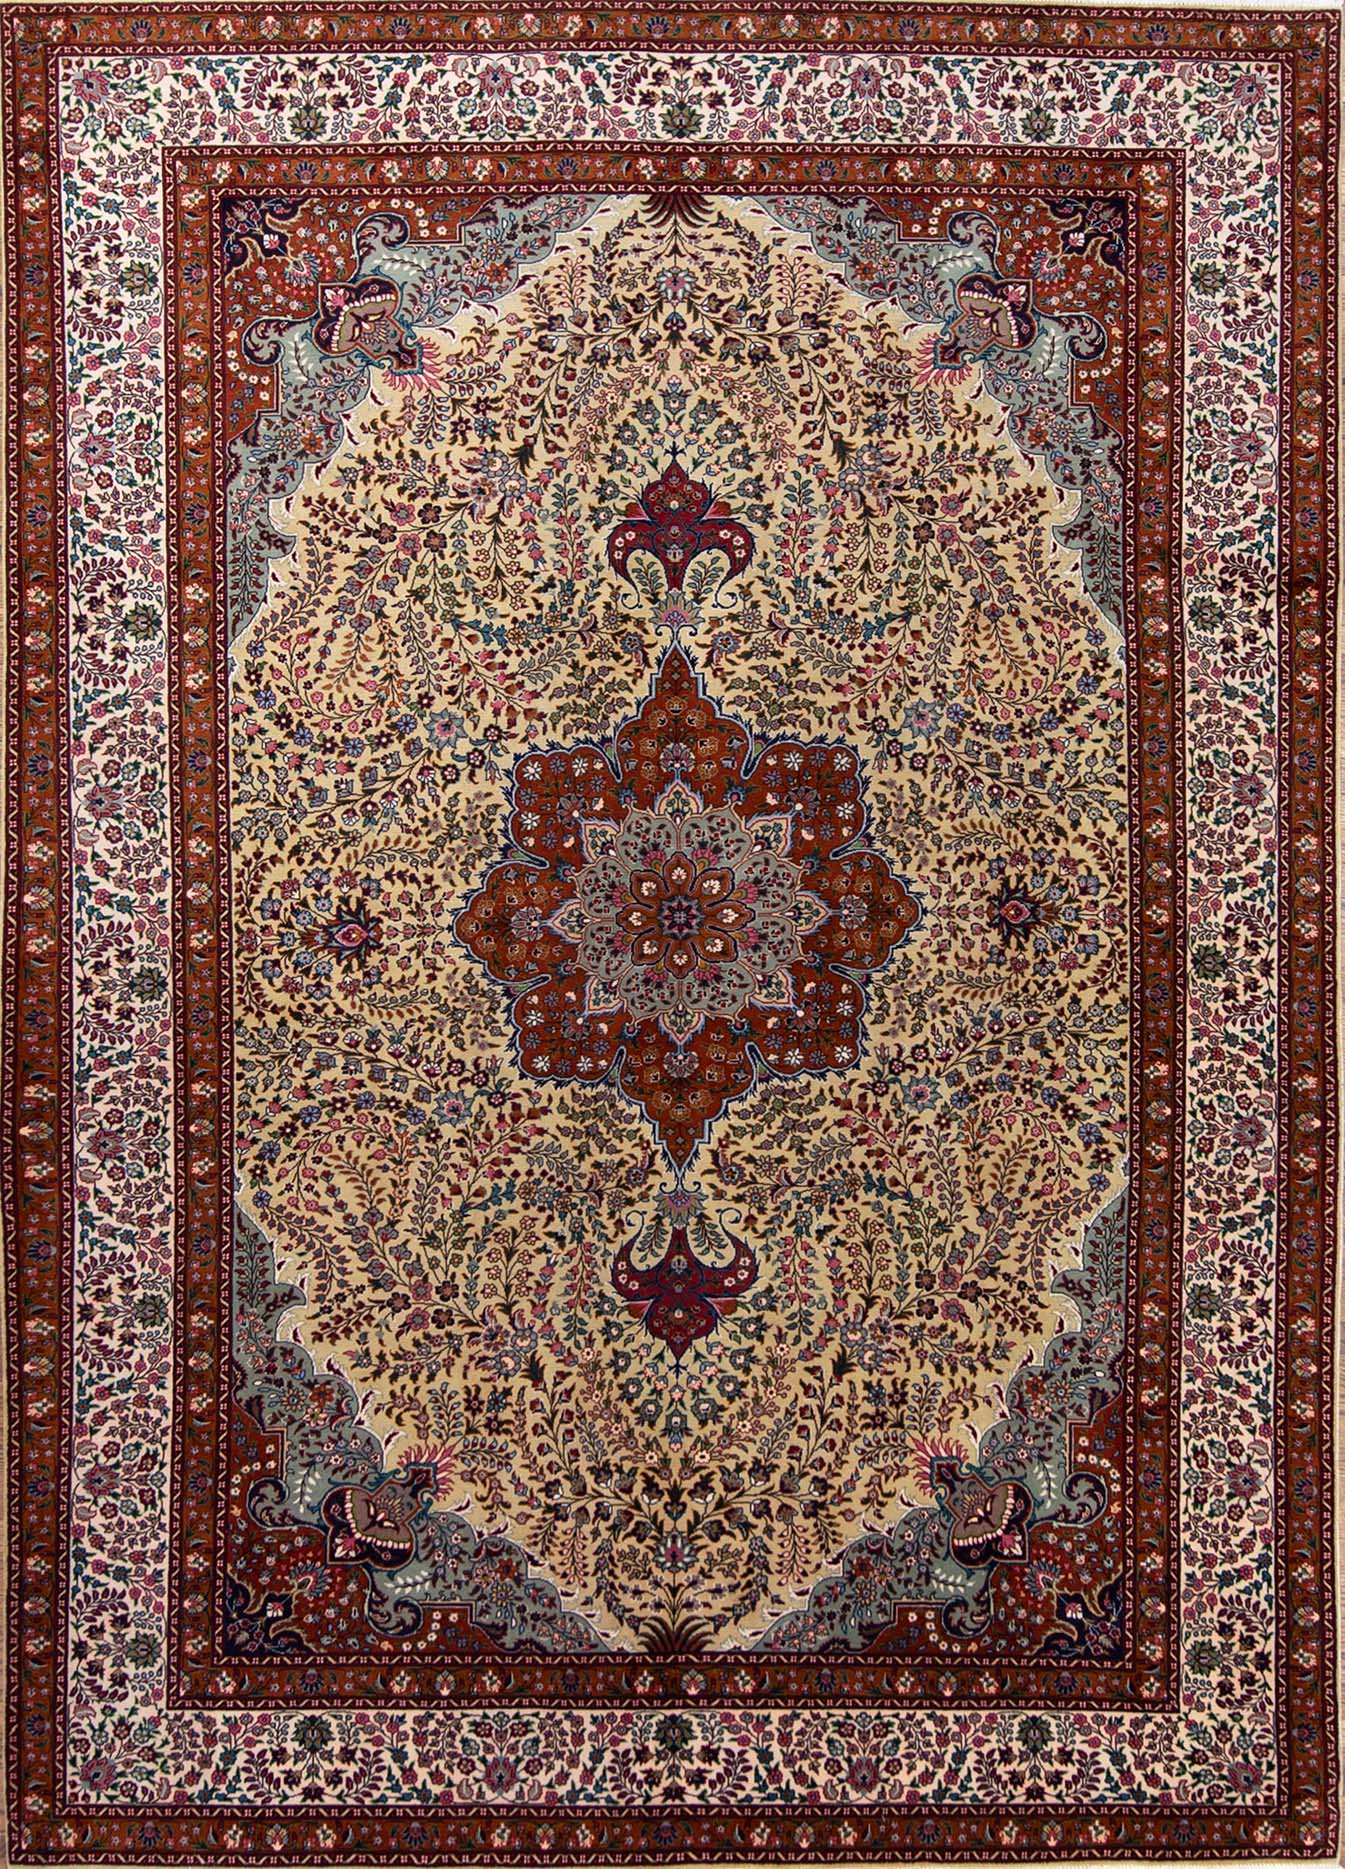 Beige area rugs. Handmade wool Persian area rugs floral style with beige and rustic brown colors. Size 6.9x10.